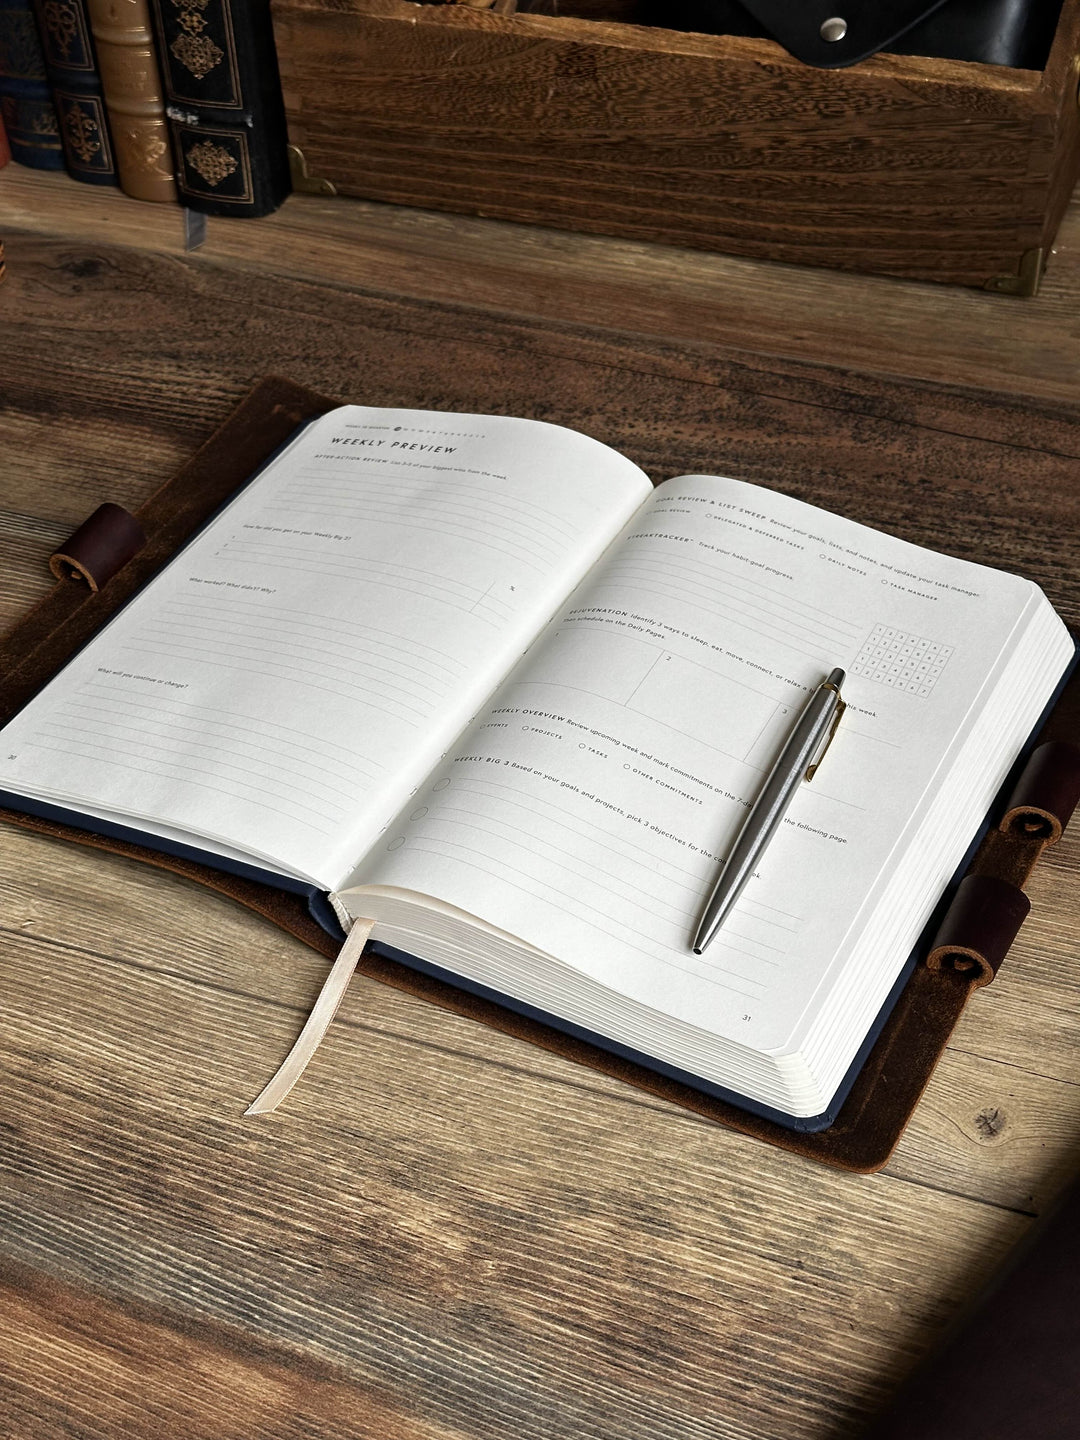 Focus Cut - Refillable Leather Journal